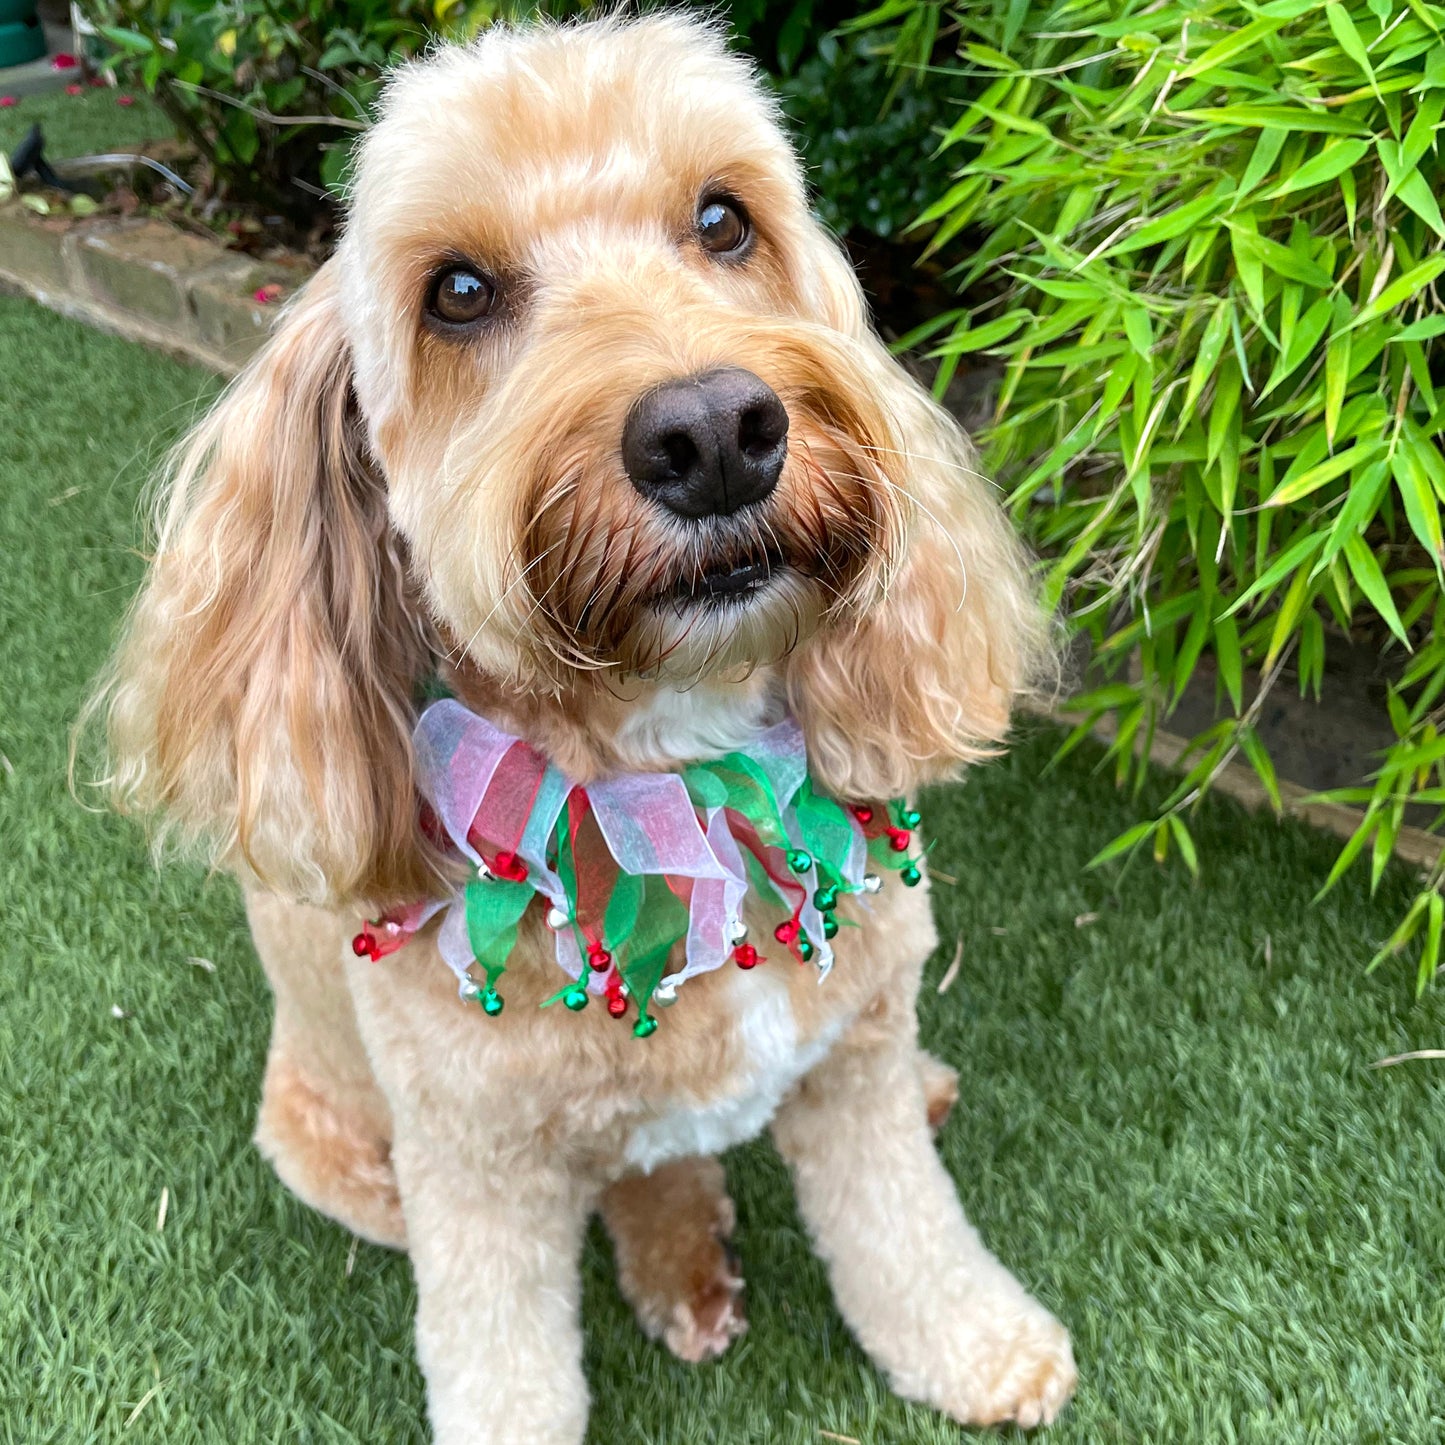 Dog is wearing a Festive dog frill with red, white and green tullle ribbons finished with co-ordinating jingle bells. Elasticated for ease of fit.